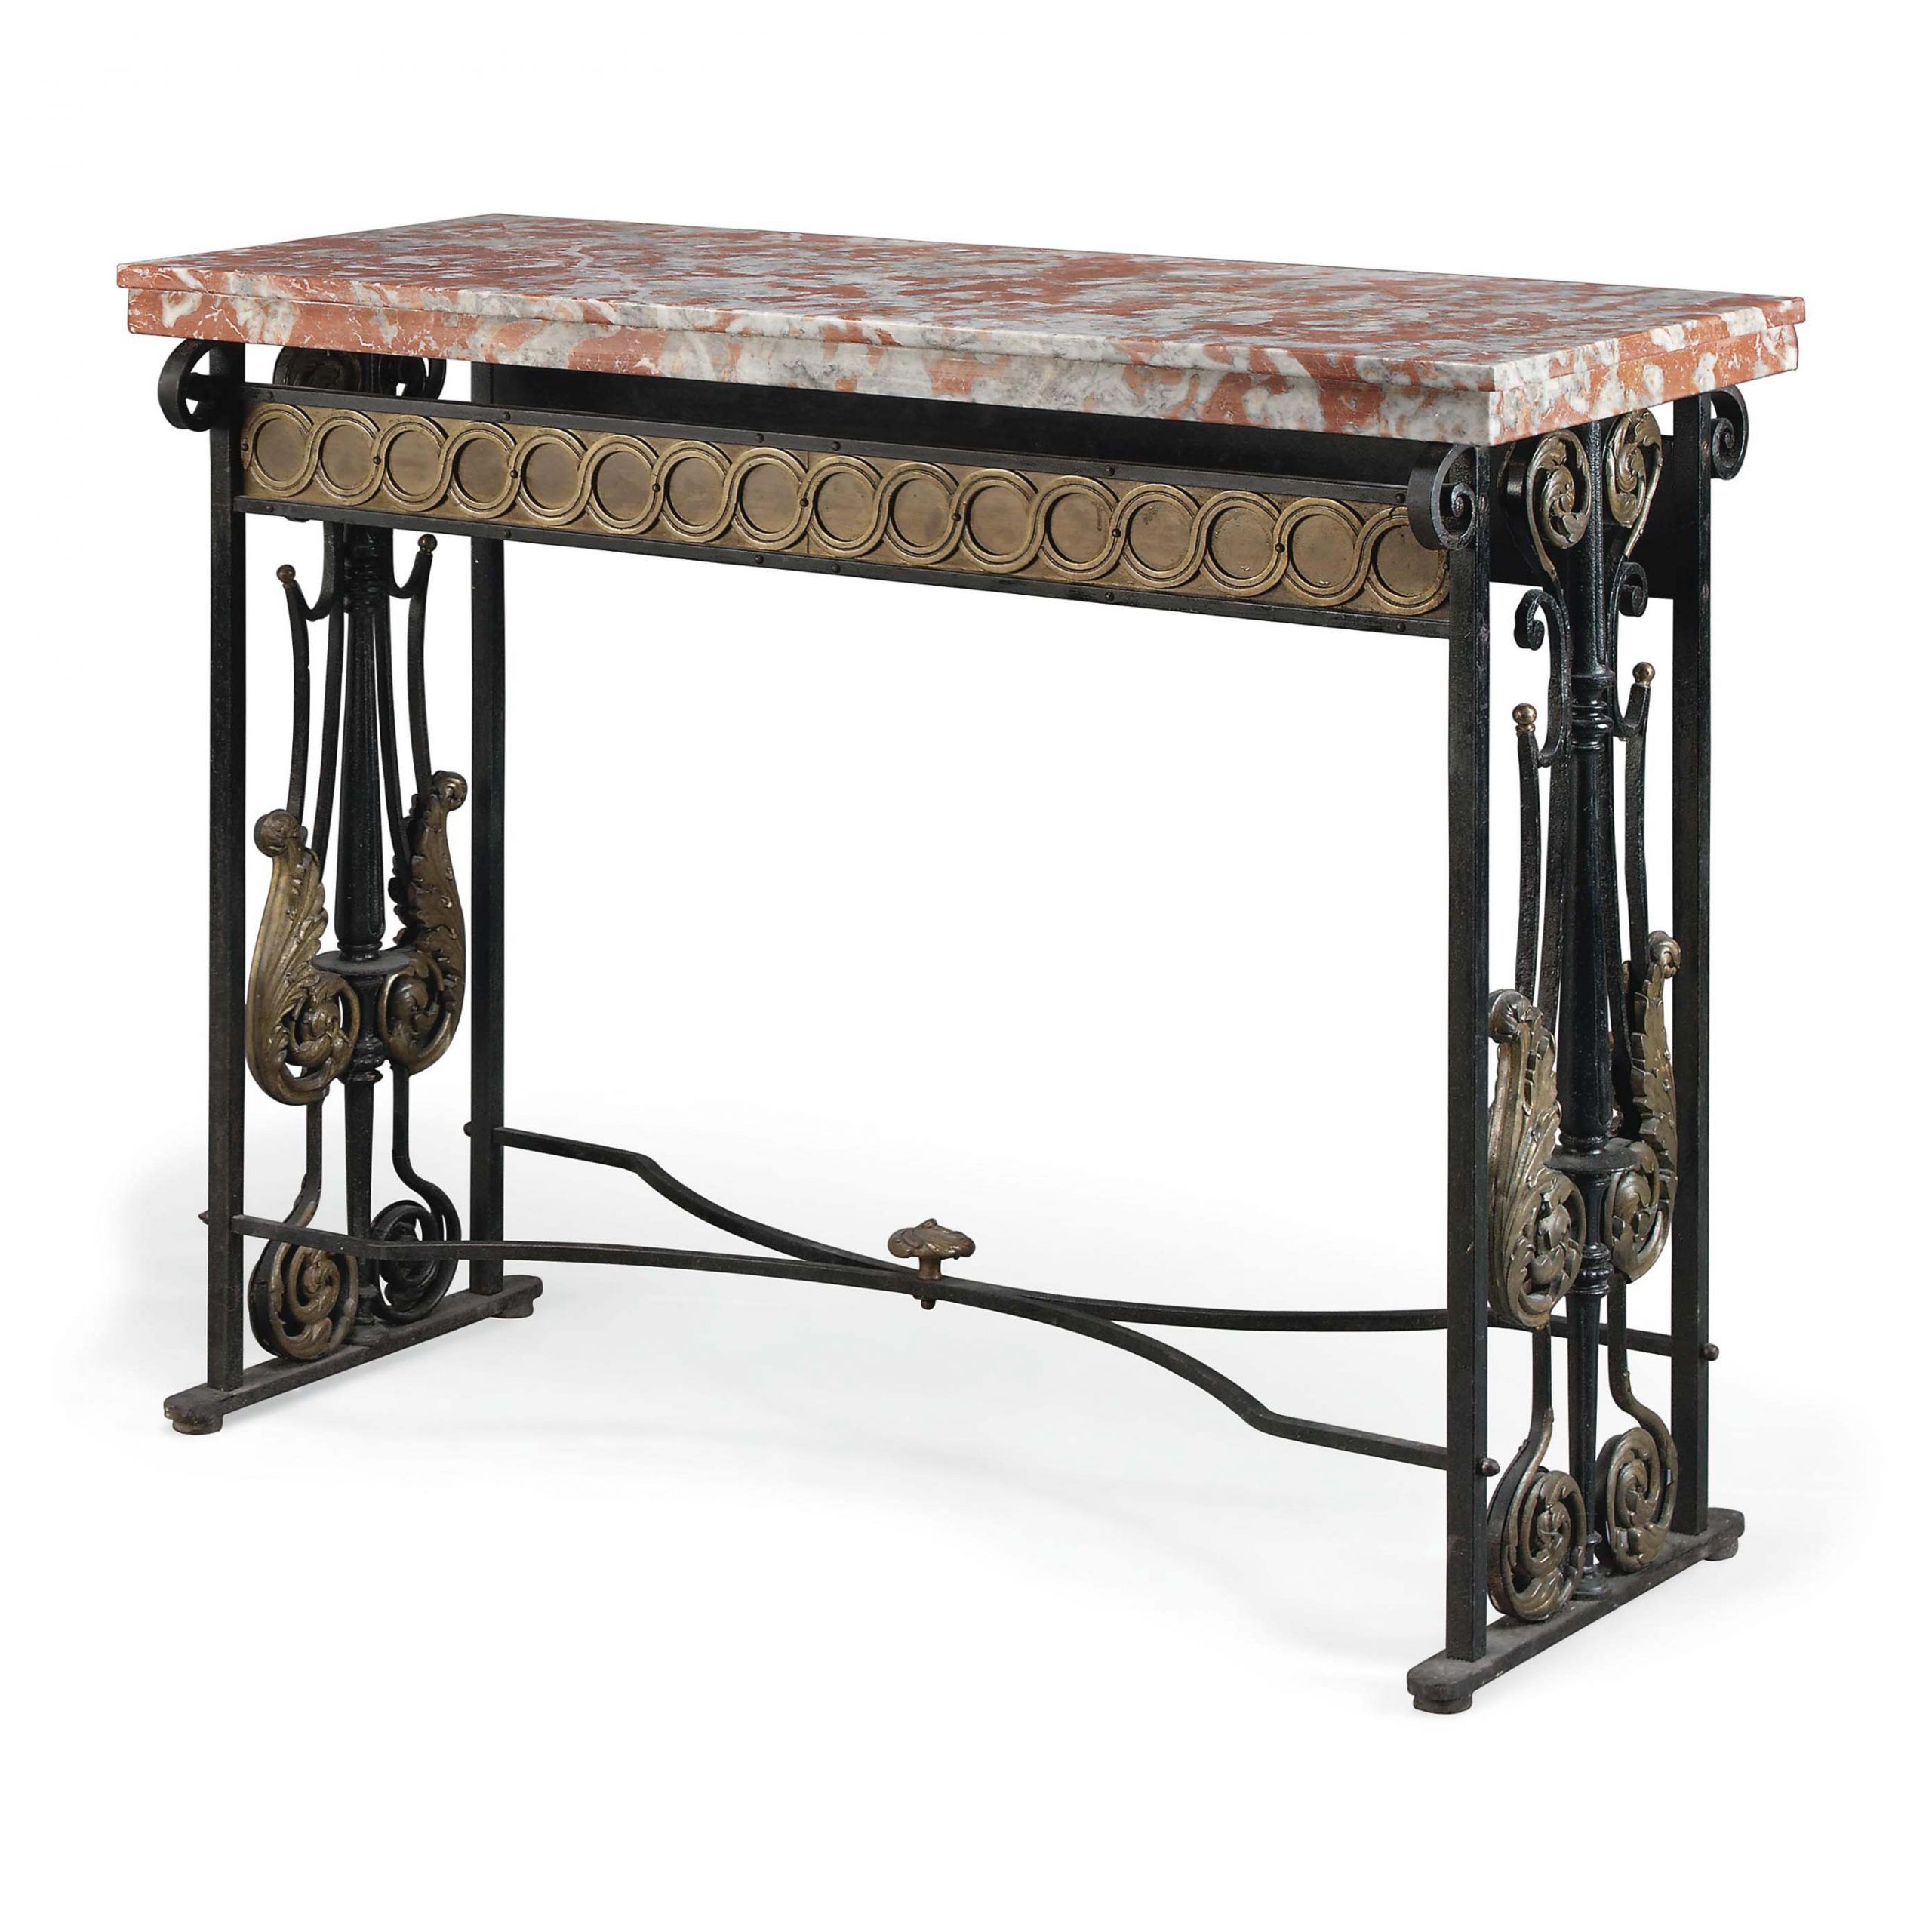 A Continental Gilt Mounted Painted Wrought Iron Console Pertaining To Wrought Iron Console Tables (View 14 of 20)